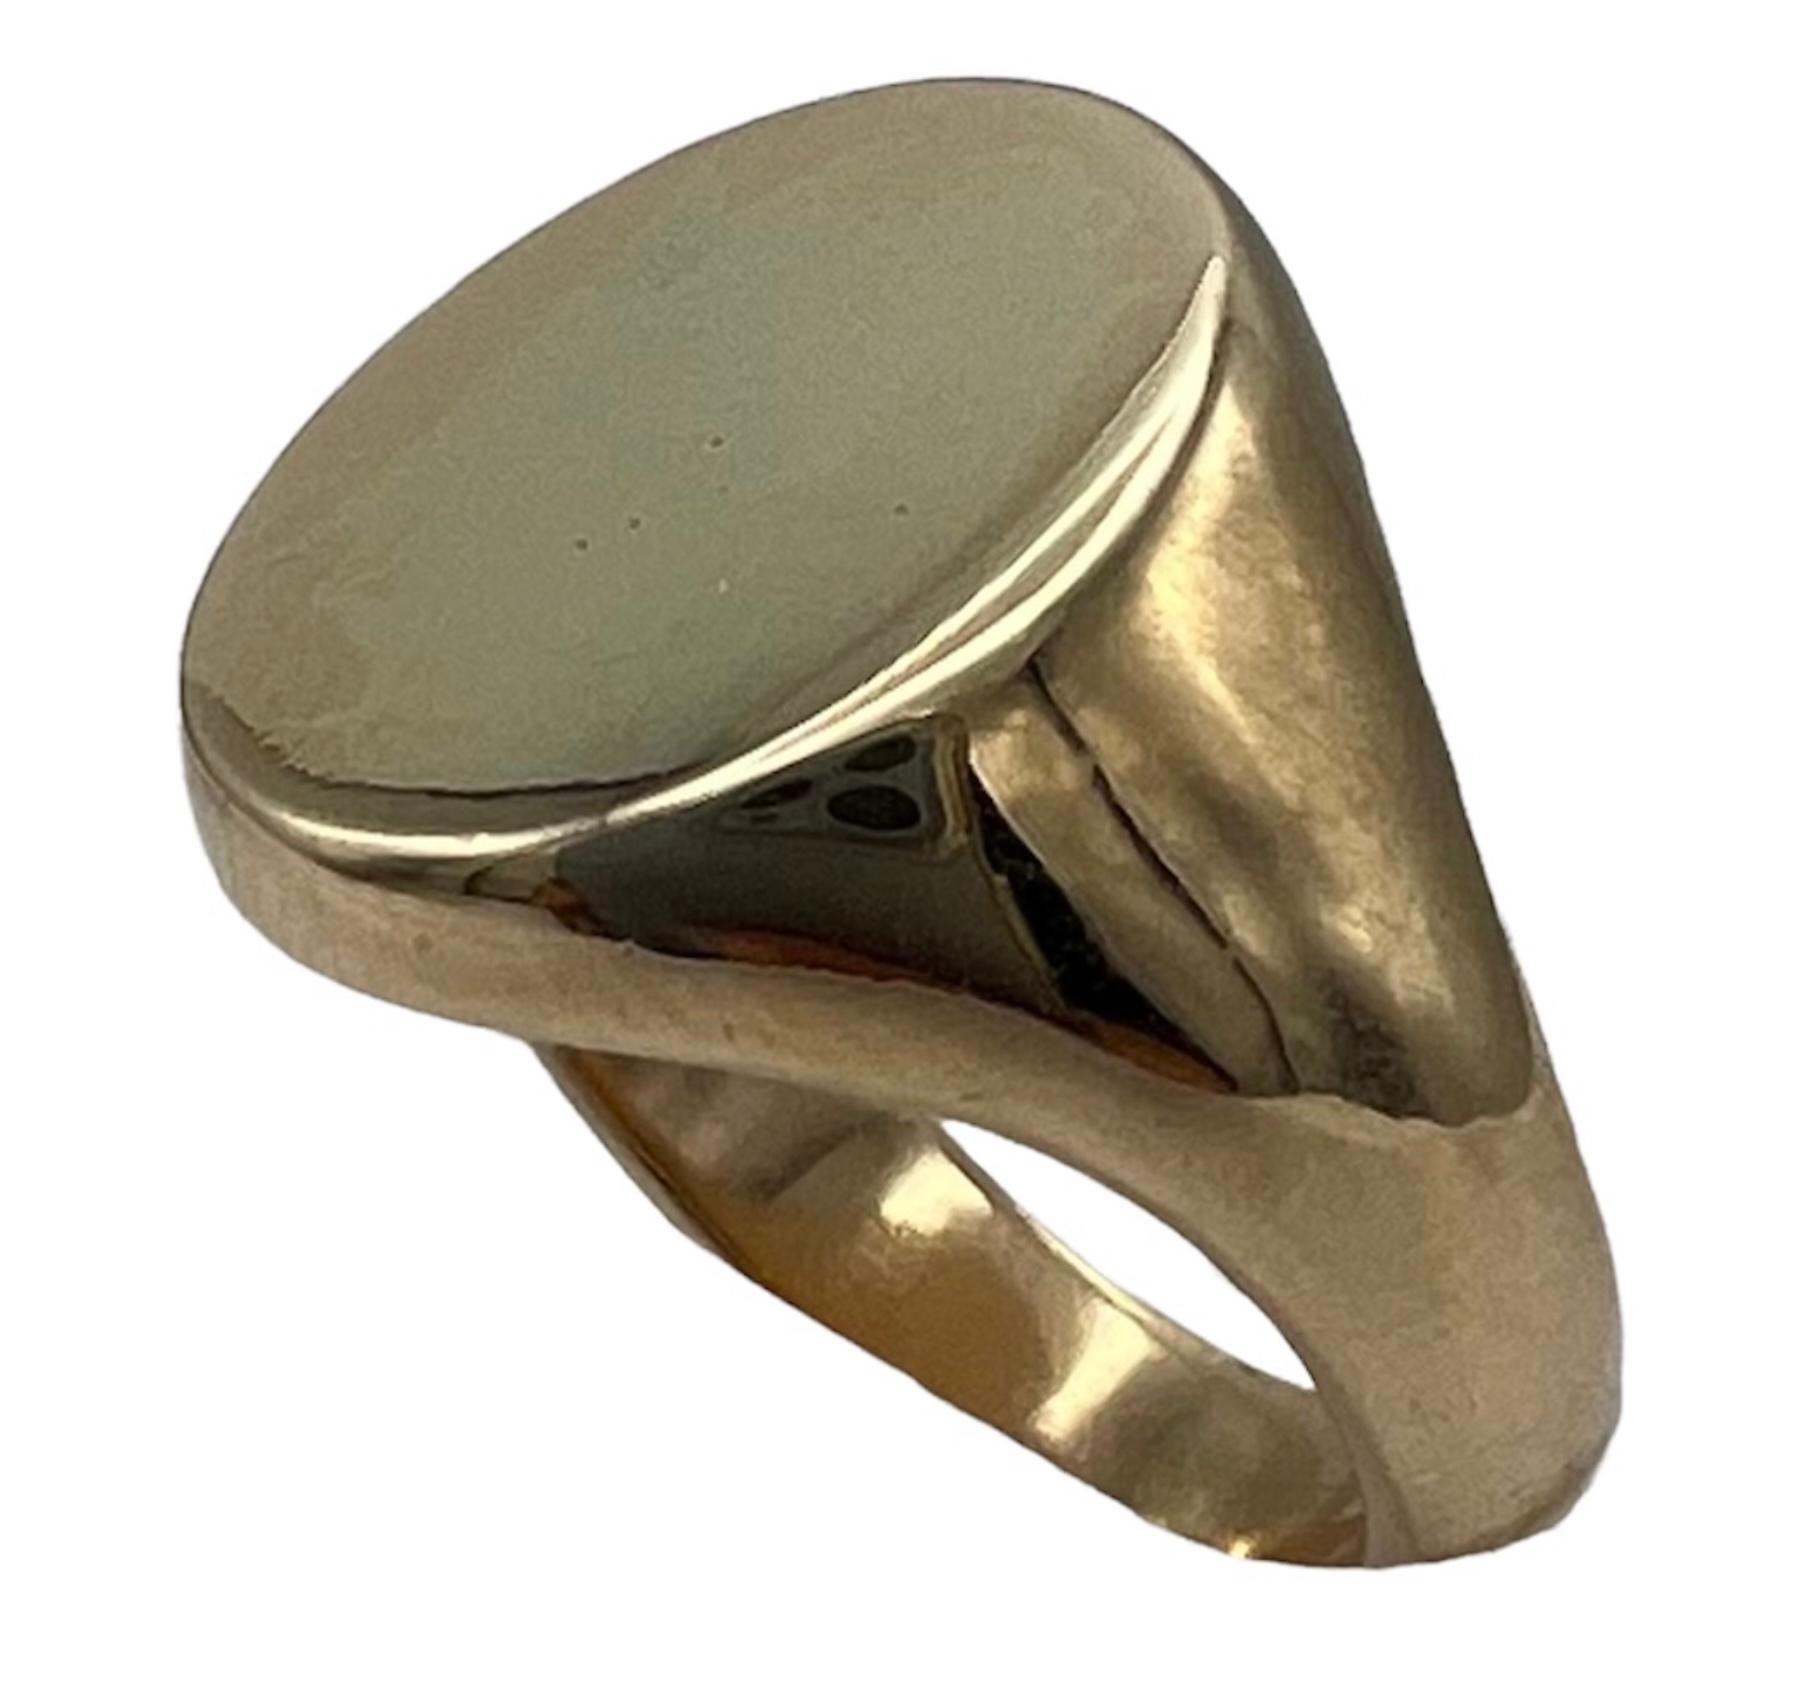 DESIGNER: Tiffany & Co.
CIRCA: 1950’s
MATERIALS: 14K Yellow Gold
WEIGHT: 15.8 grams
MEASUREMENTS: 3/8” x 1/2”
RING SIZE: 9
HALLMARKS: Tiffany & Co. 14K

ITEM DETAILS:
​Less is more for this Tiffany & Co. Gold Signet Ring, made of 14kyellow